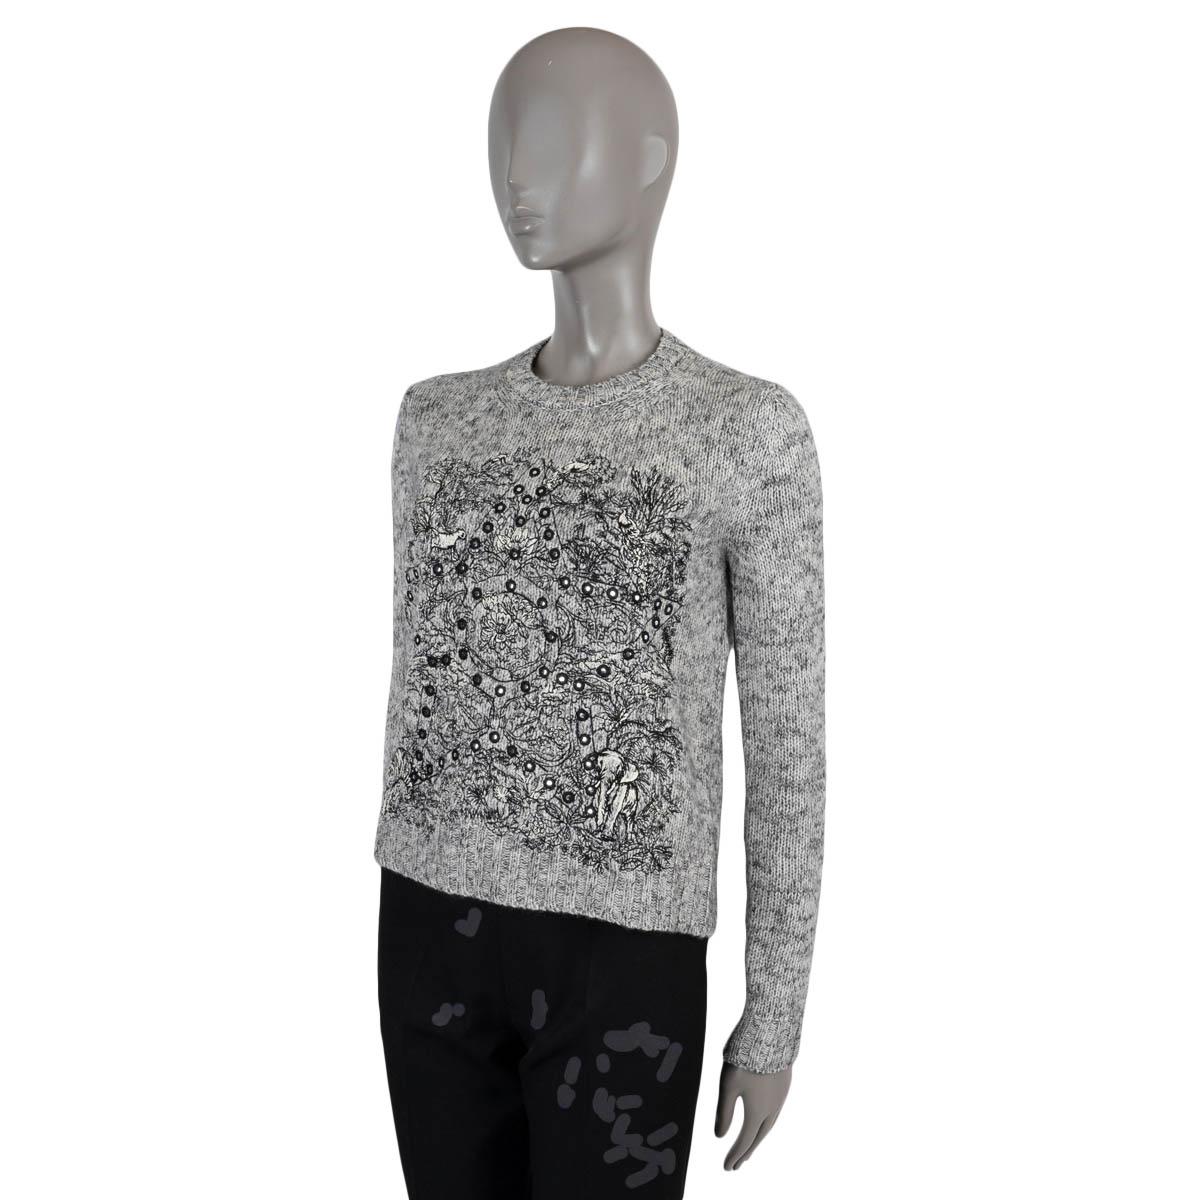 100% authentic Christian Dior 2023 embroidered sweater in light grey and navy cashmere (86%), mohair (5%), alpaca (5%) and polyamide (4%). Embroidered with black and ecru cotton (100%) and mirror beads. Logo embroidery on the back. Has been worn and